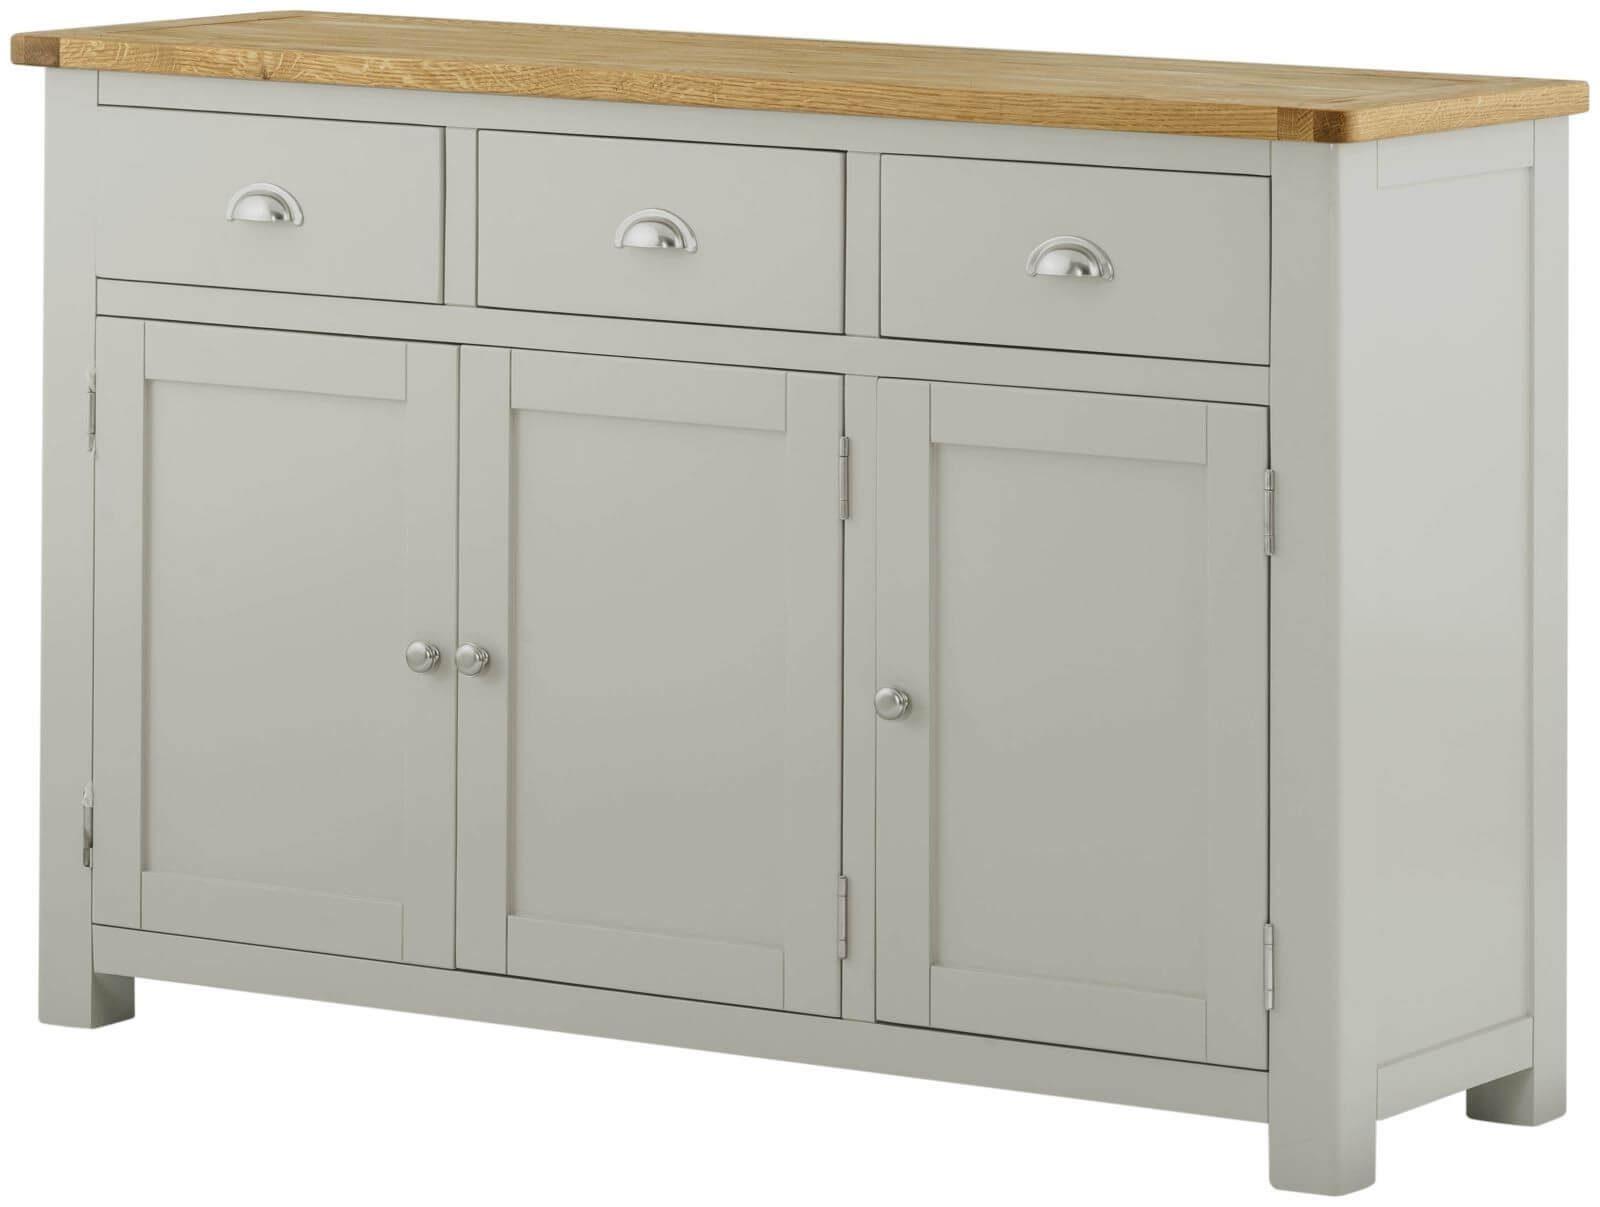 Showing image for Seattle 3-door sideboard - stone